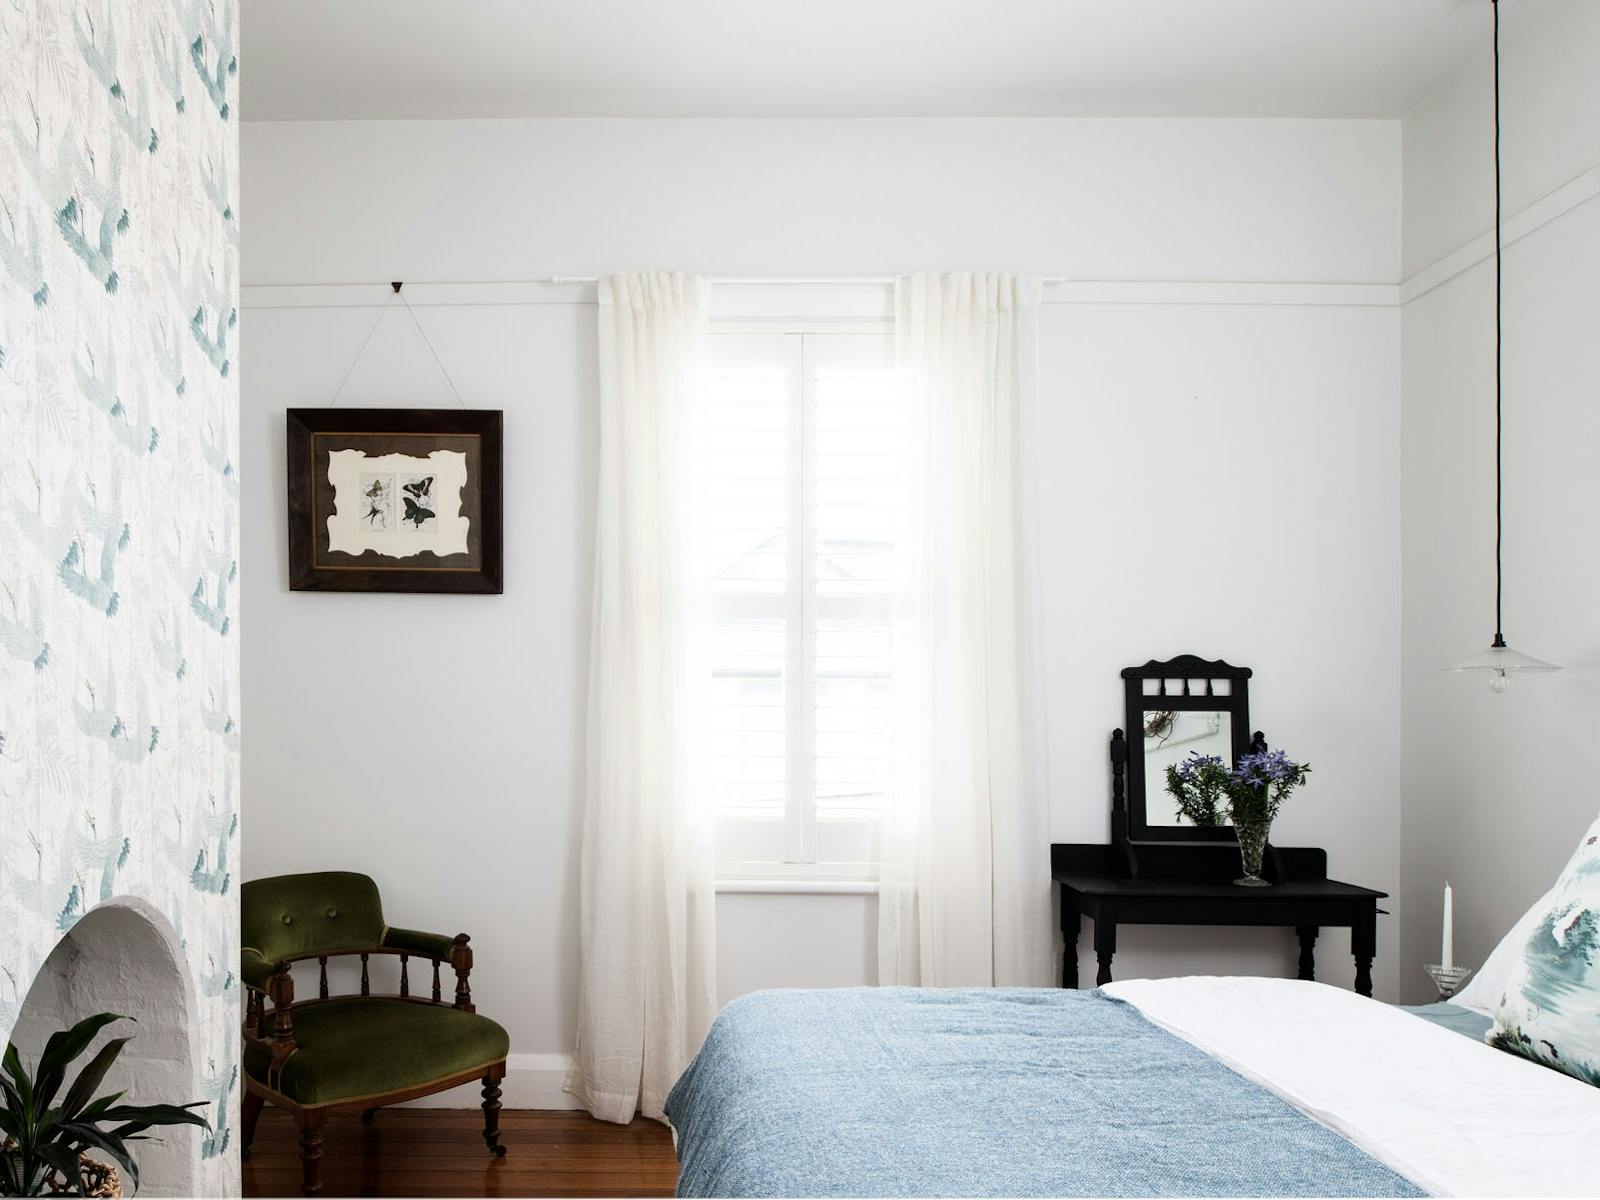 Enjoy a restful sleep in pure linen sheets and luxury bedding in this vintage inspired bedroom